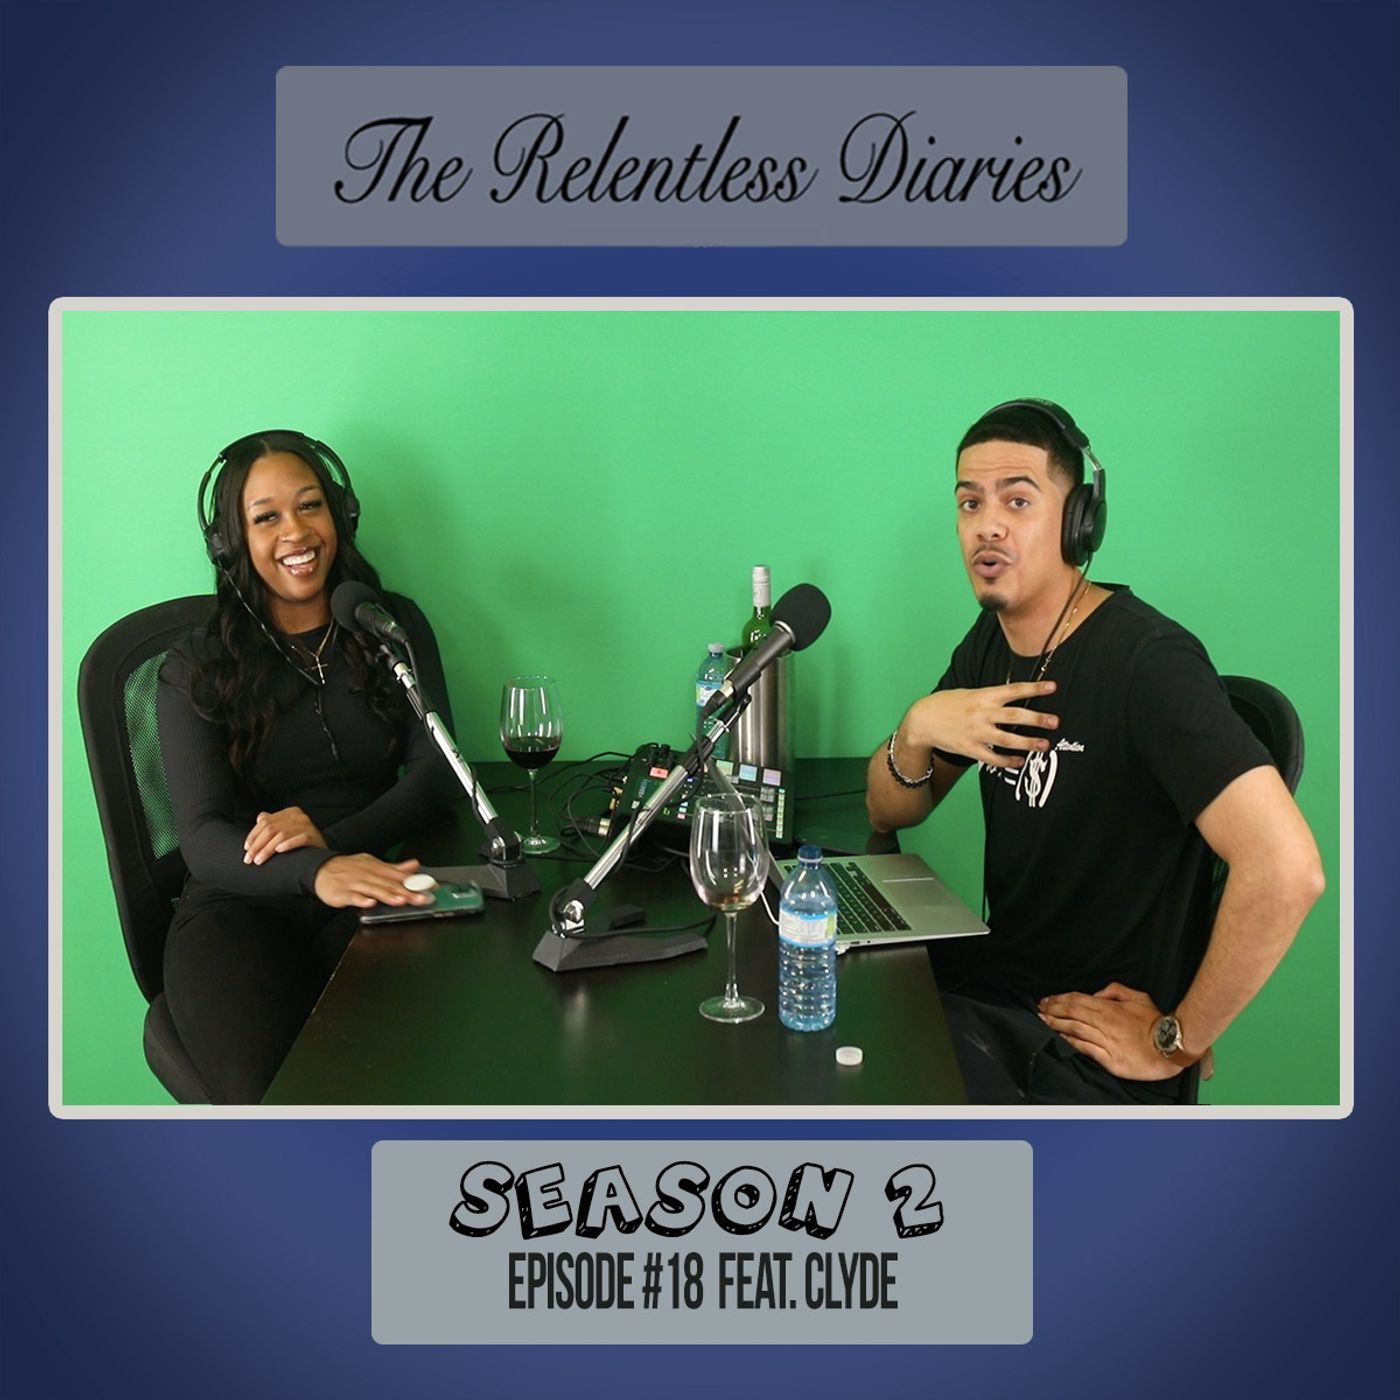 The Relentless Diaries ”This Episode Is [Censored]” Feat. Clyde